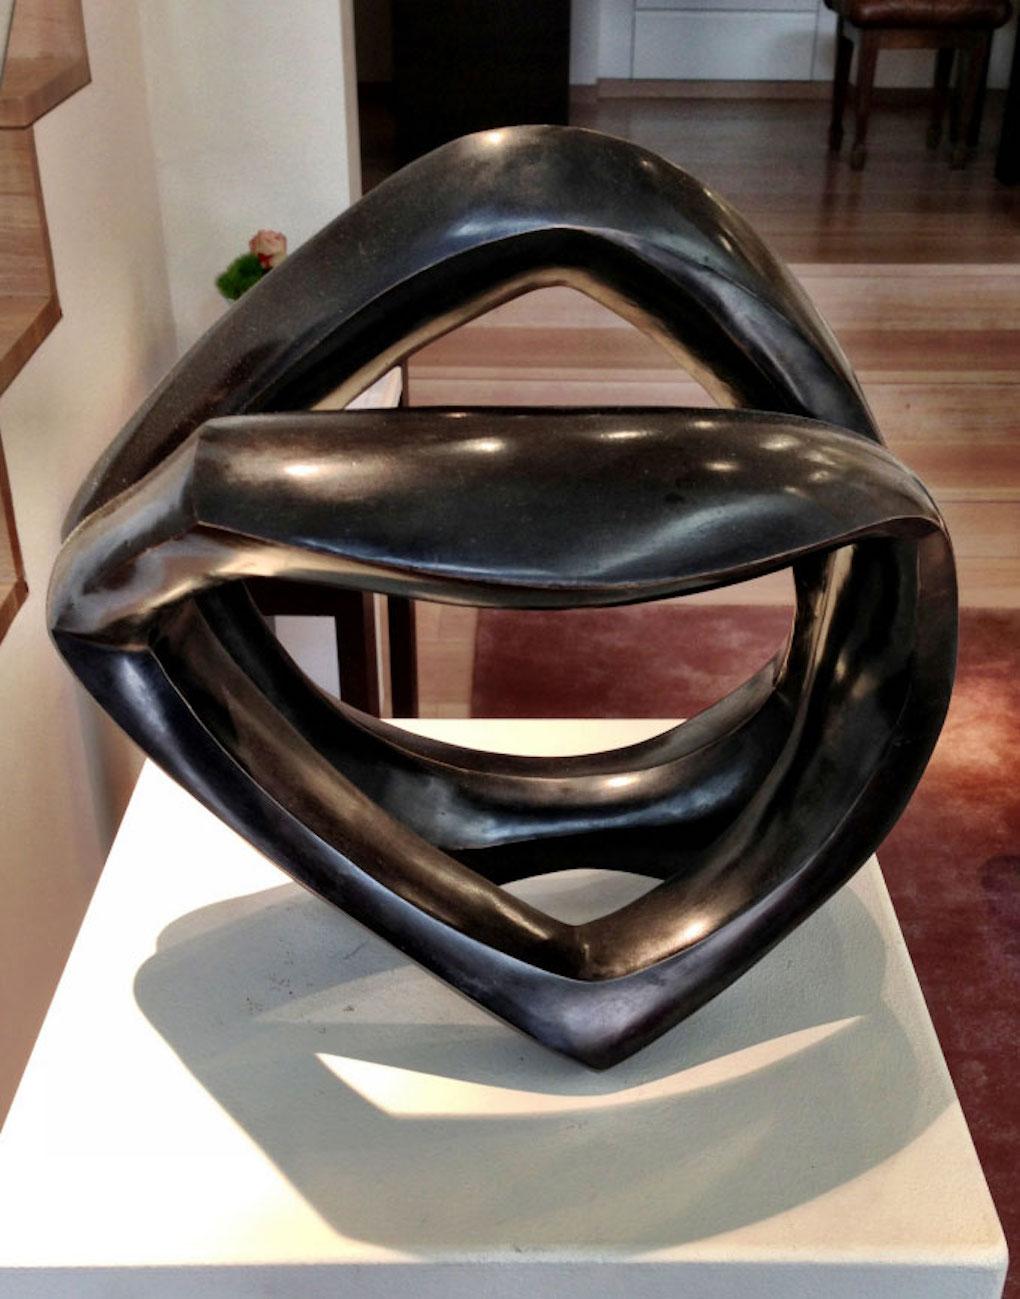 Bronze Black Sculpture 'O.T. 2' by Carola Eggeling
Abstract sculpture with beautiful curved lines.

German bronze black sculpture
Bronze patinated
Certificate of authenticity
Numbered and signed artwork
Limited edition of 9
Measures: H. 28 x 20 x 28